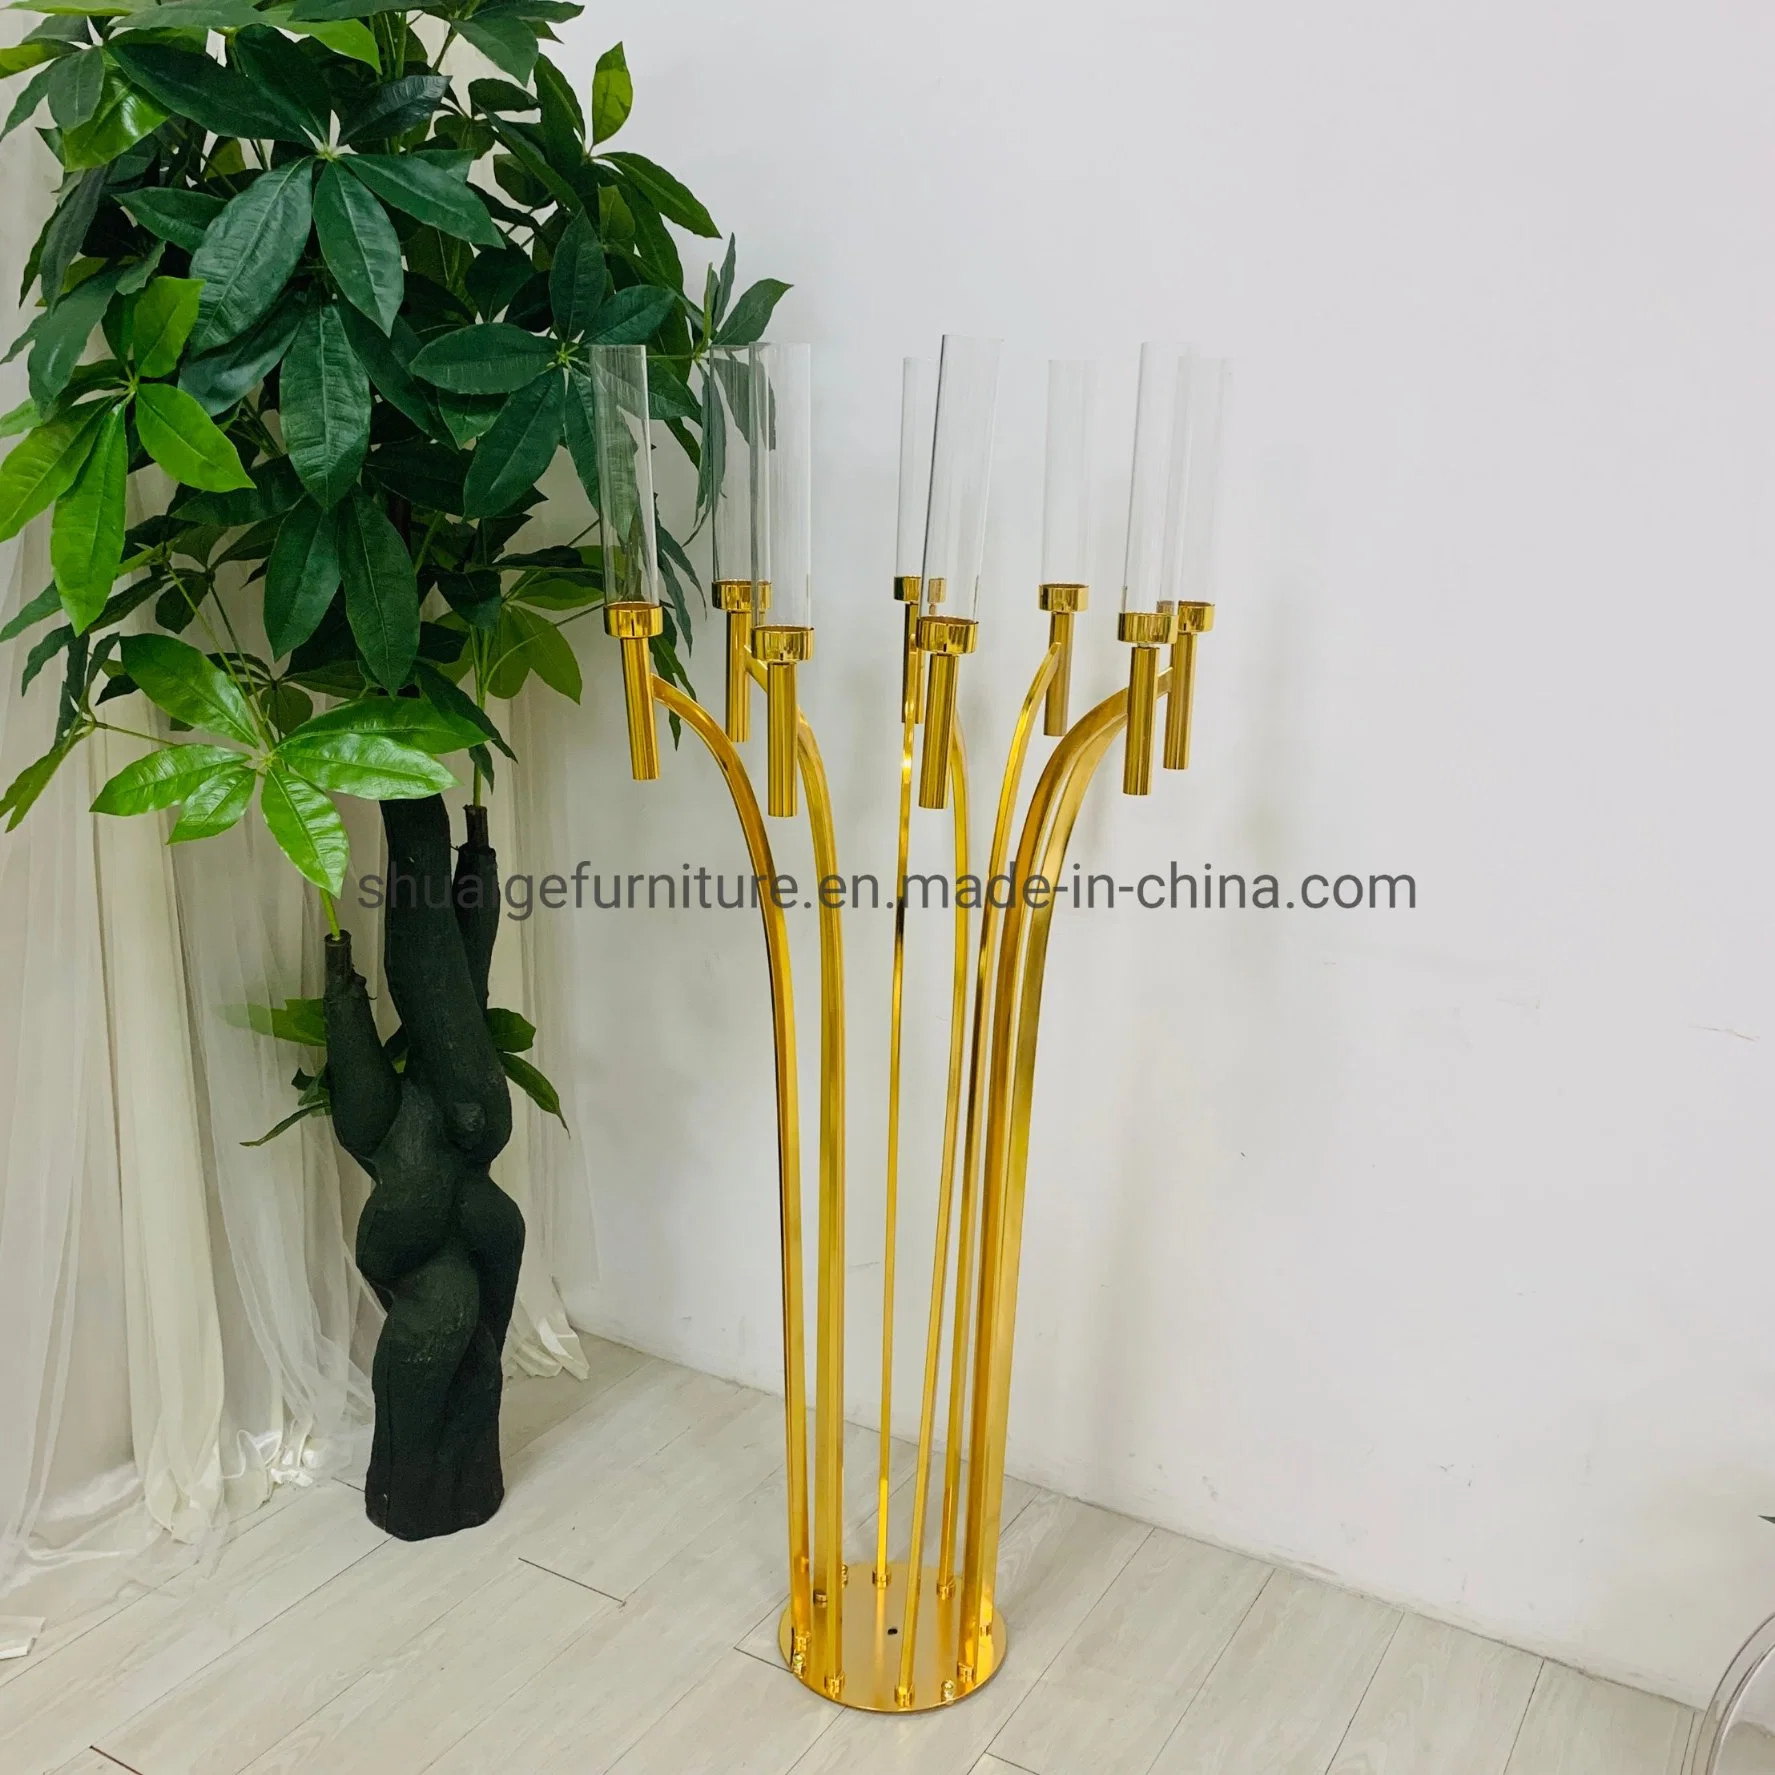 Hot Selling Glass Gold Metal Candle Holder for Table Use